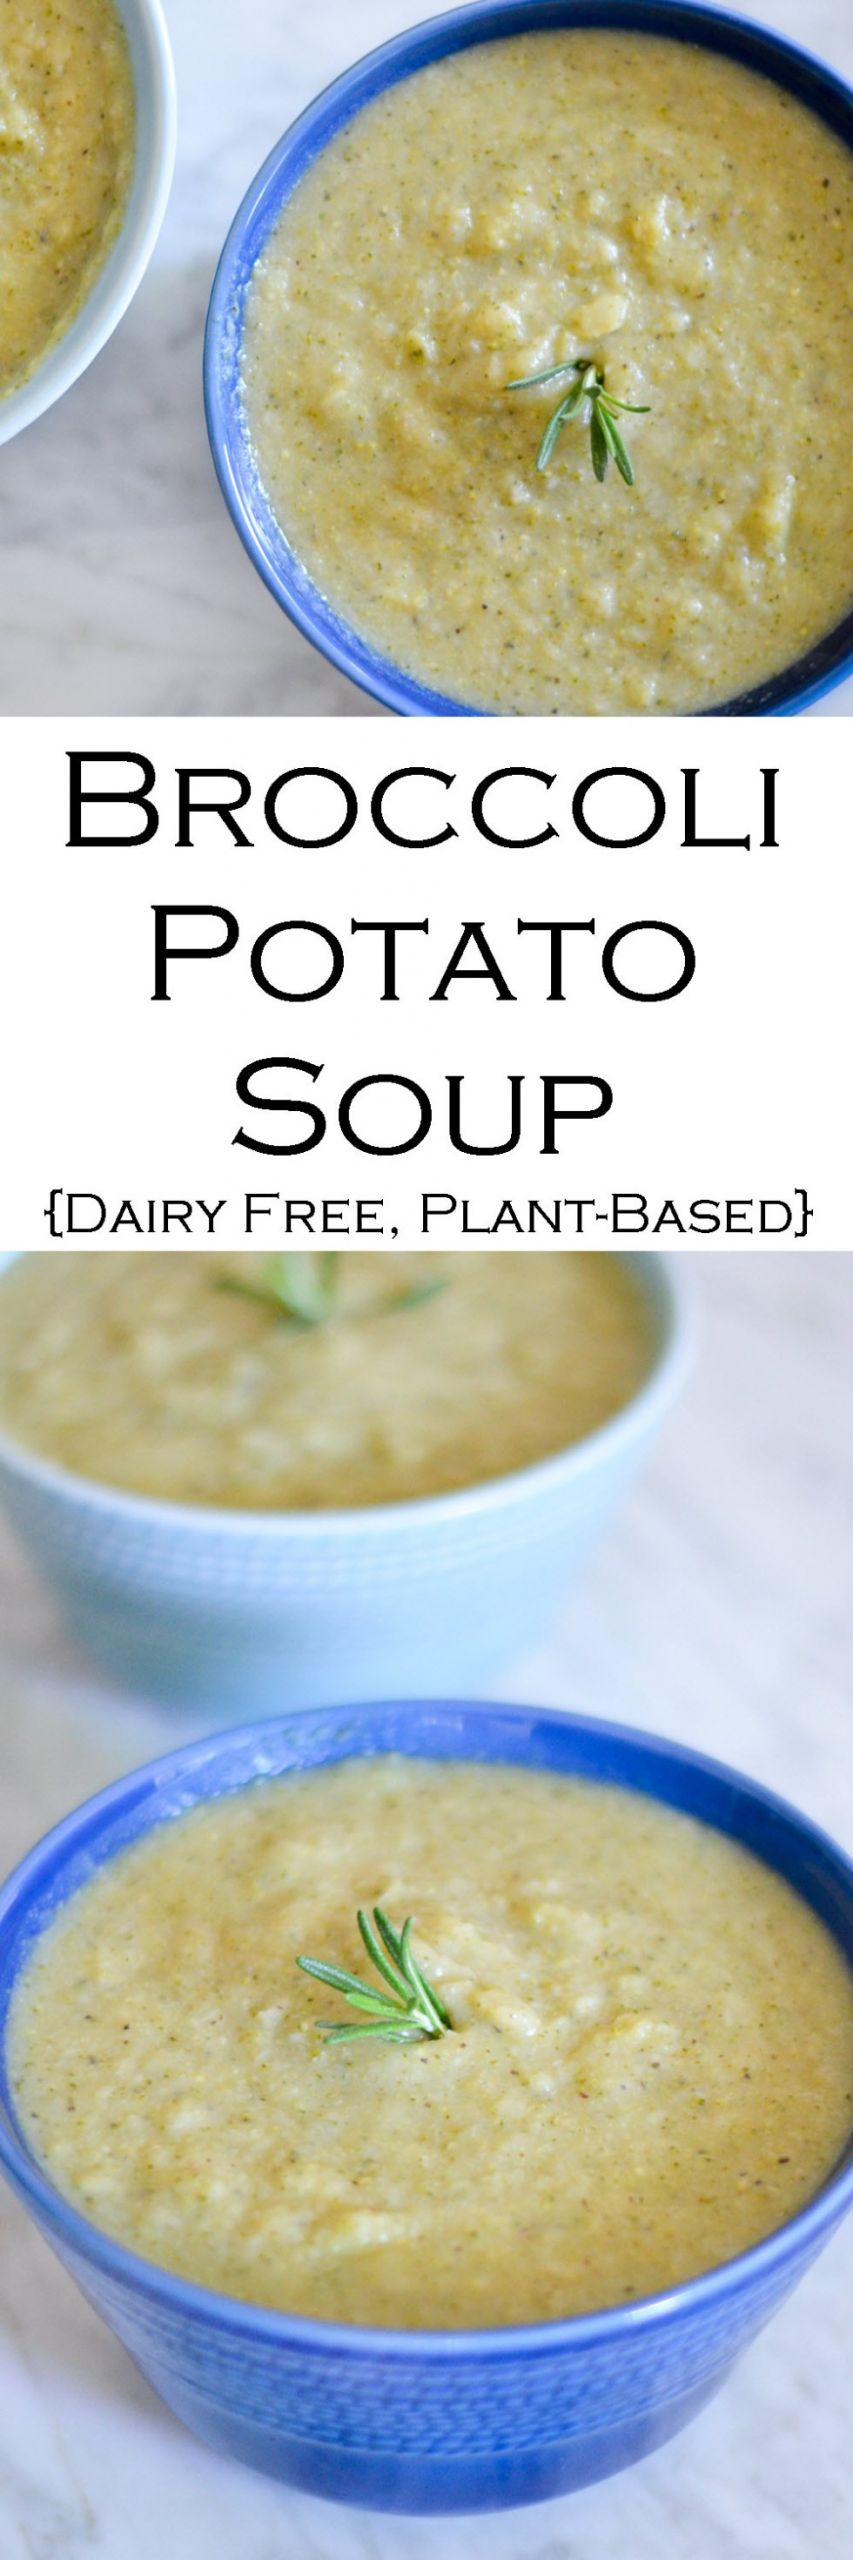 Vegan Broccoli Potato Soup
 Vegan Broccoli Potato Soup Dairy Free Plant Based